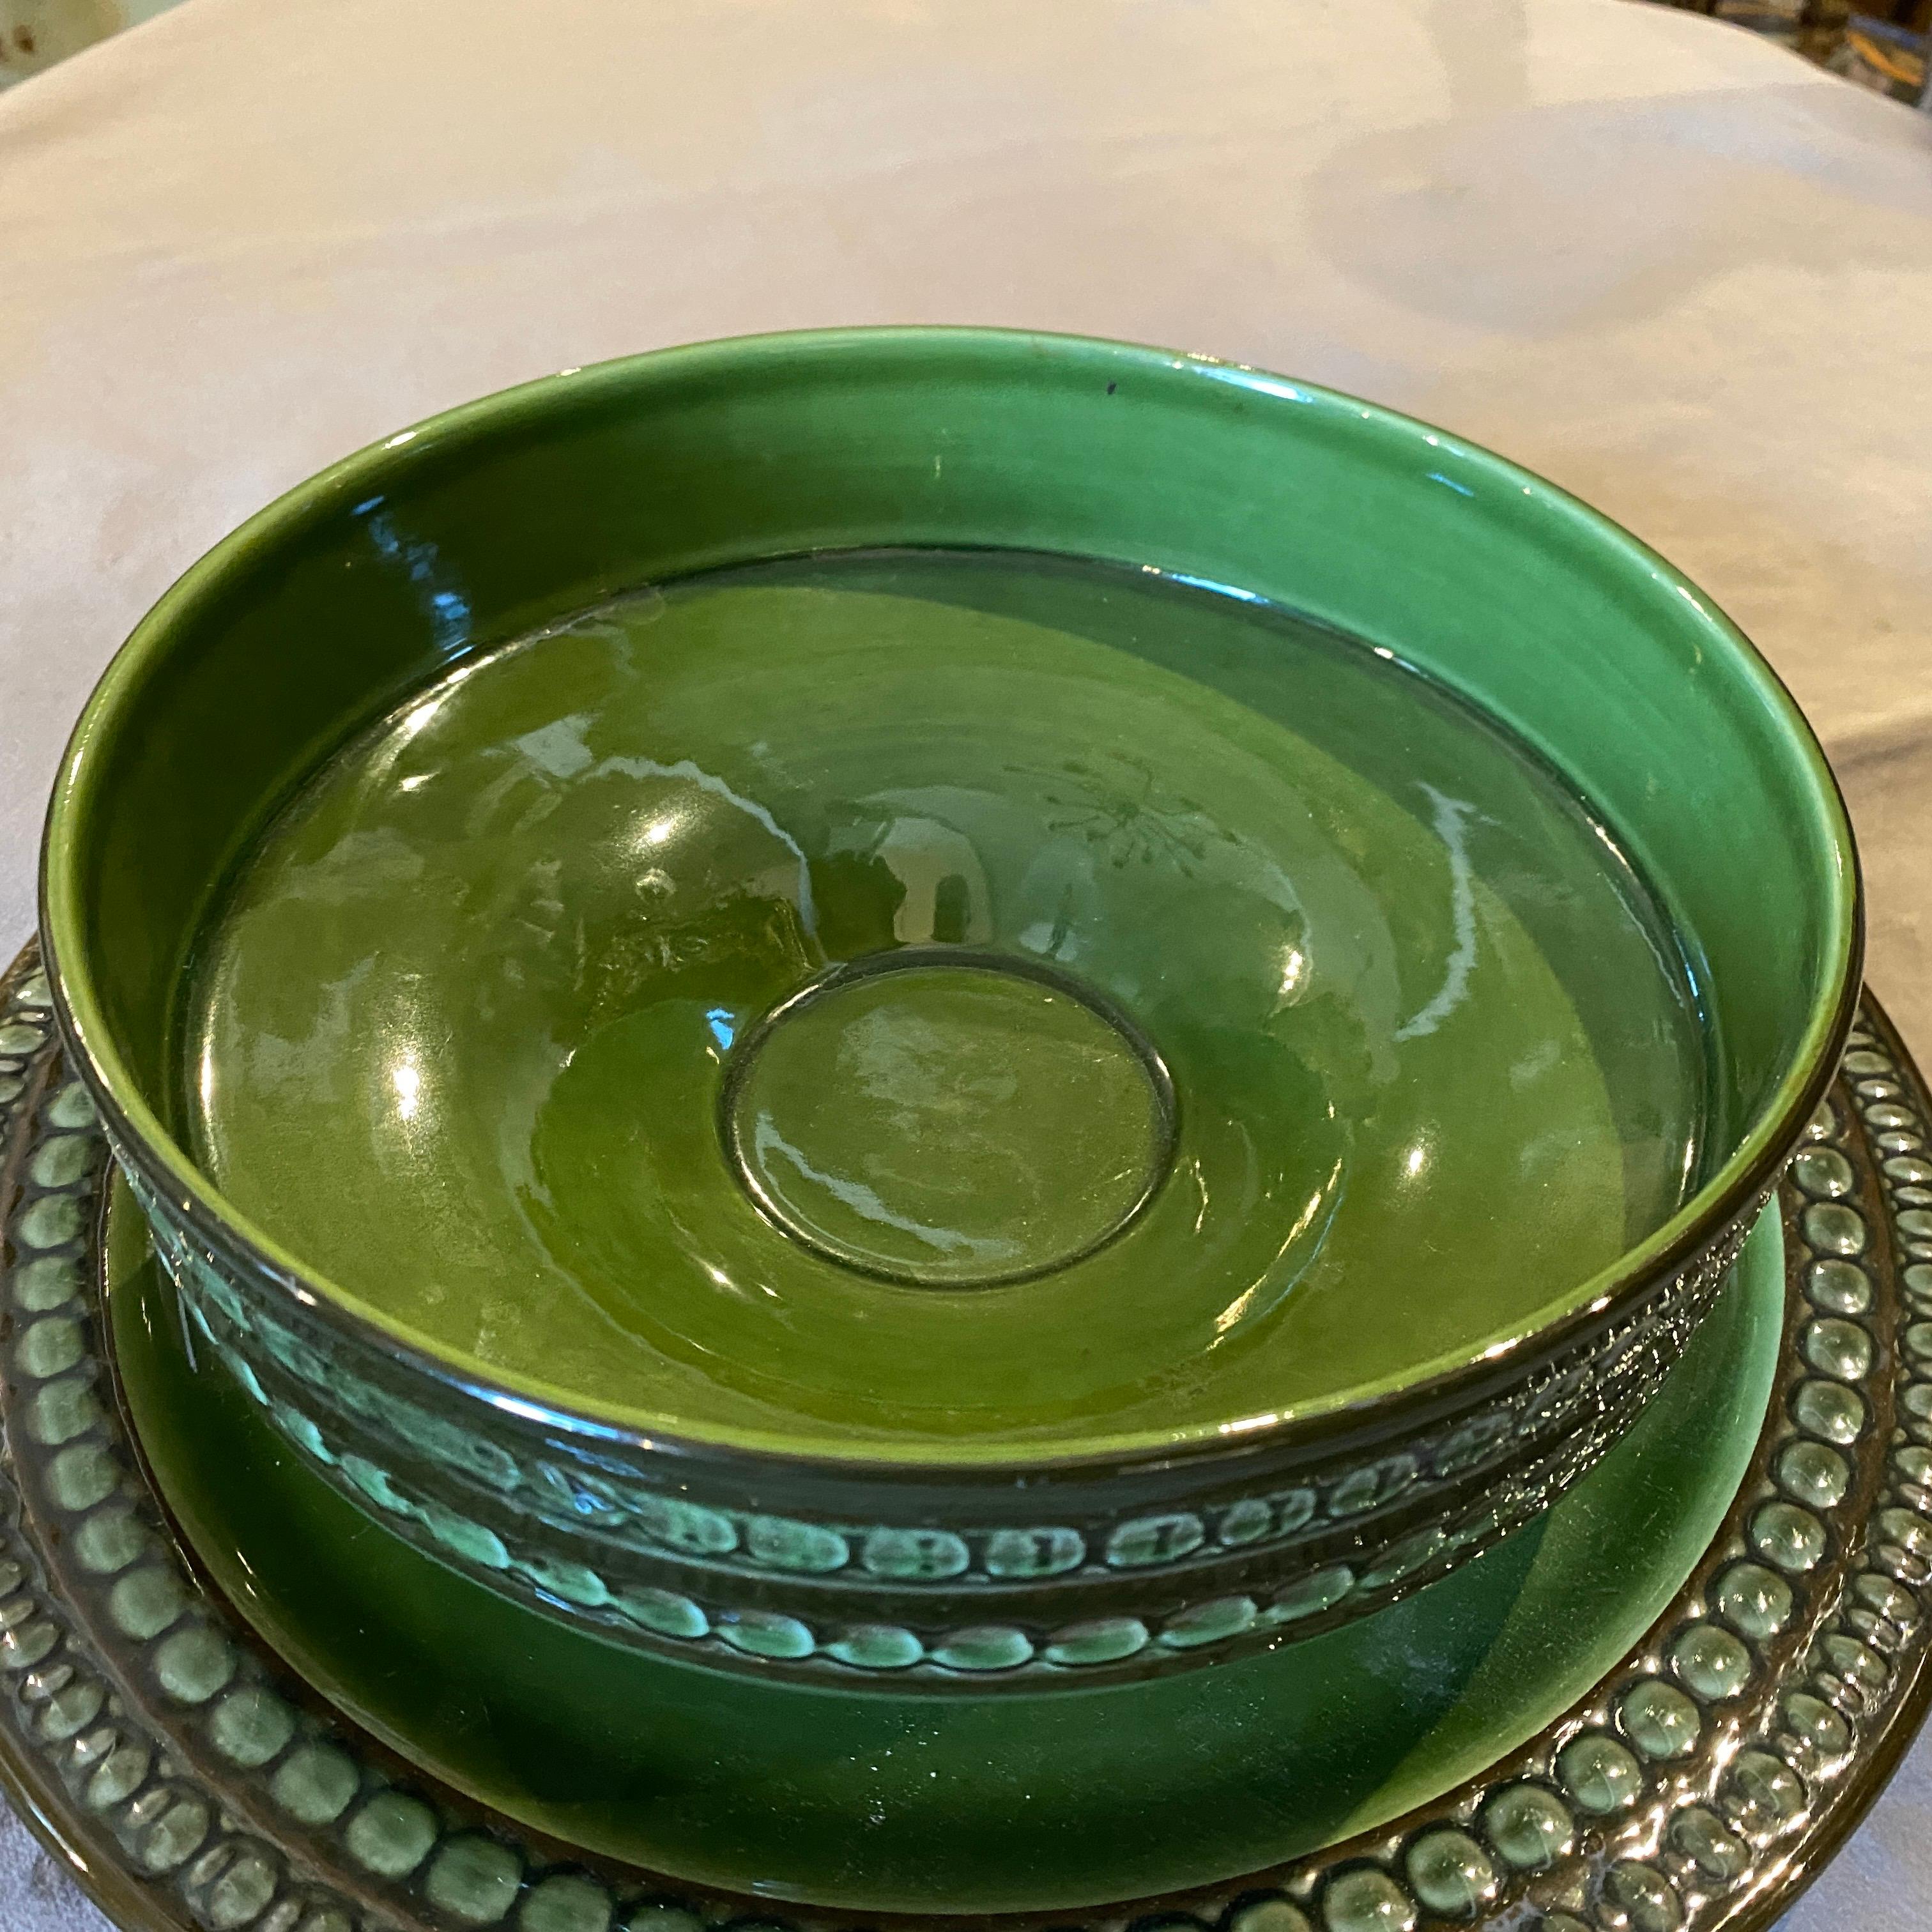 A modernist green ceramic bowl by Ernestine Salerno made in Italy in the Seventies. It's in perfect conditions.